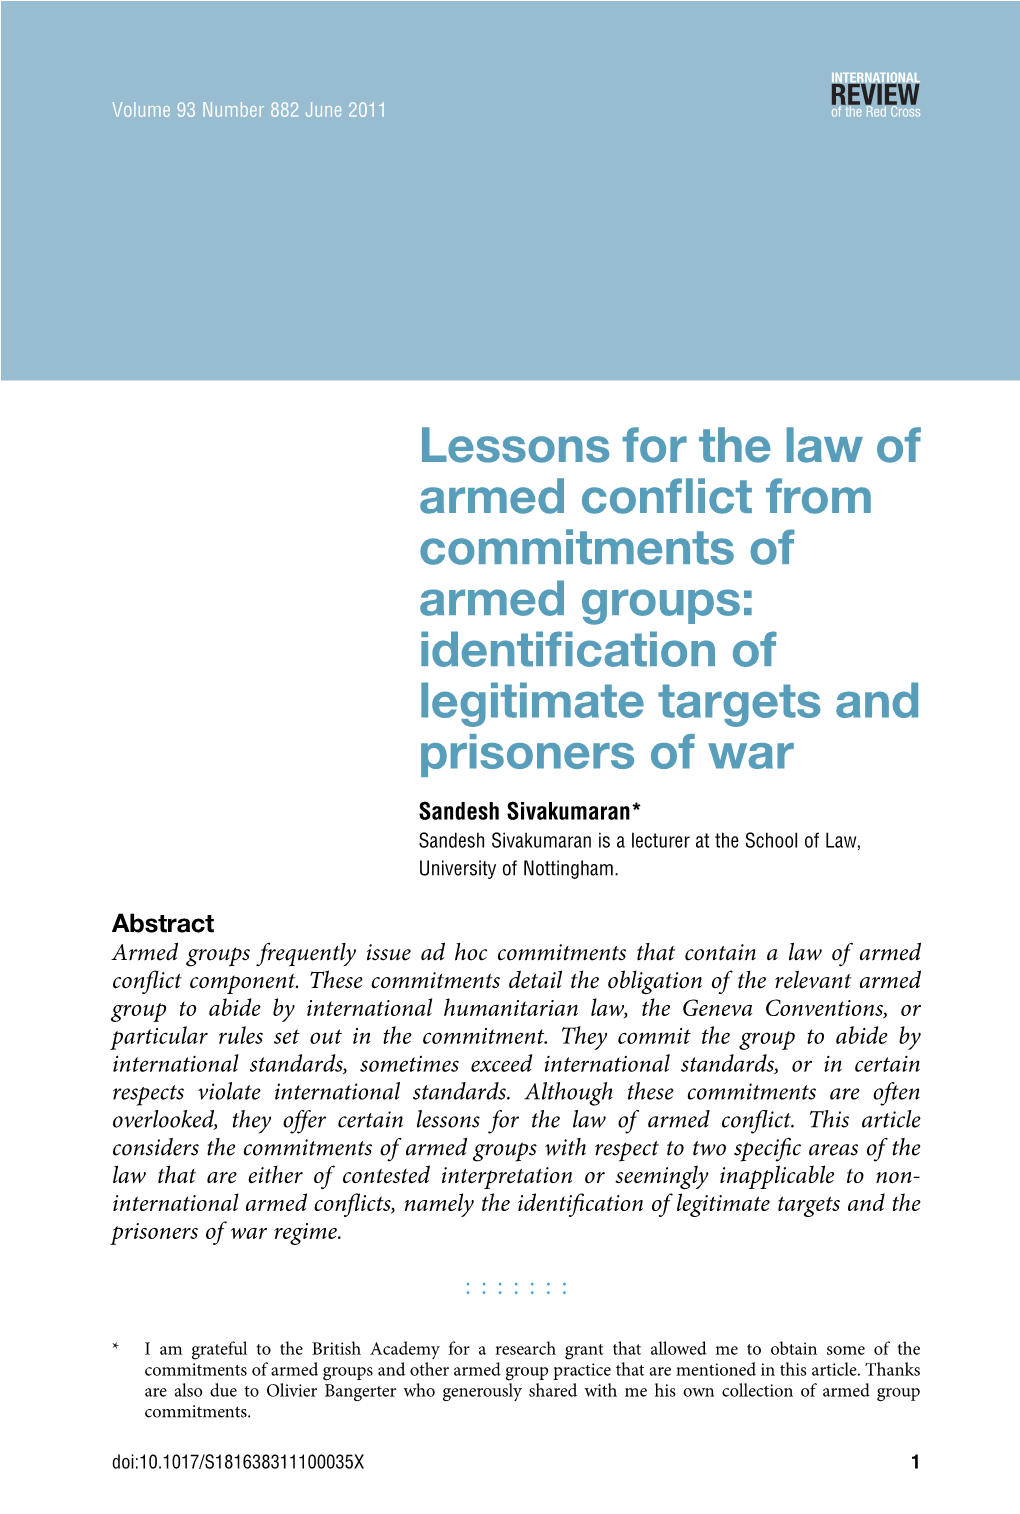 Lessons for the Law of Armed Conflict from Commitments of Armed Groups: Identification of Legitimate Targets and Prisoners of Wa